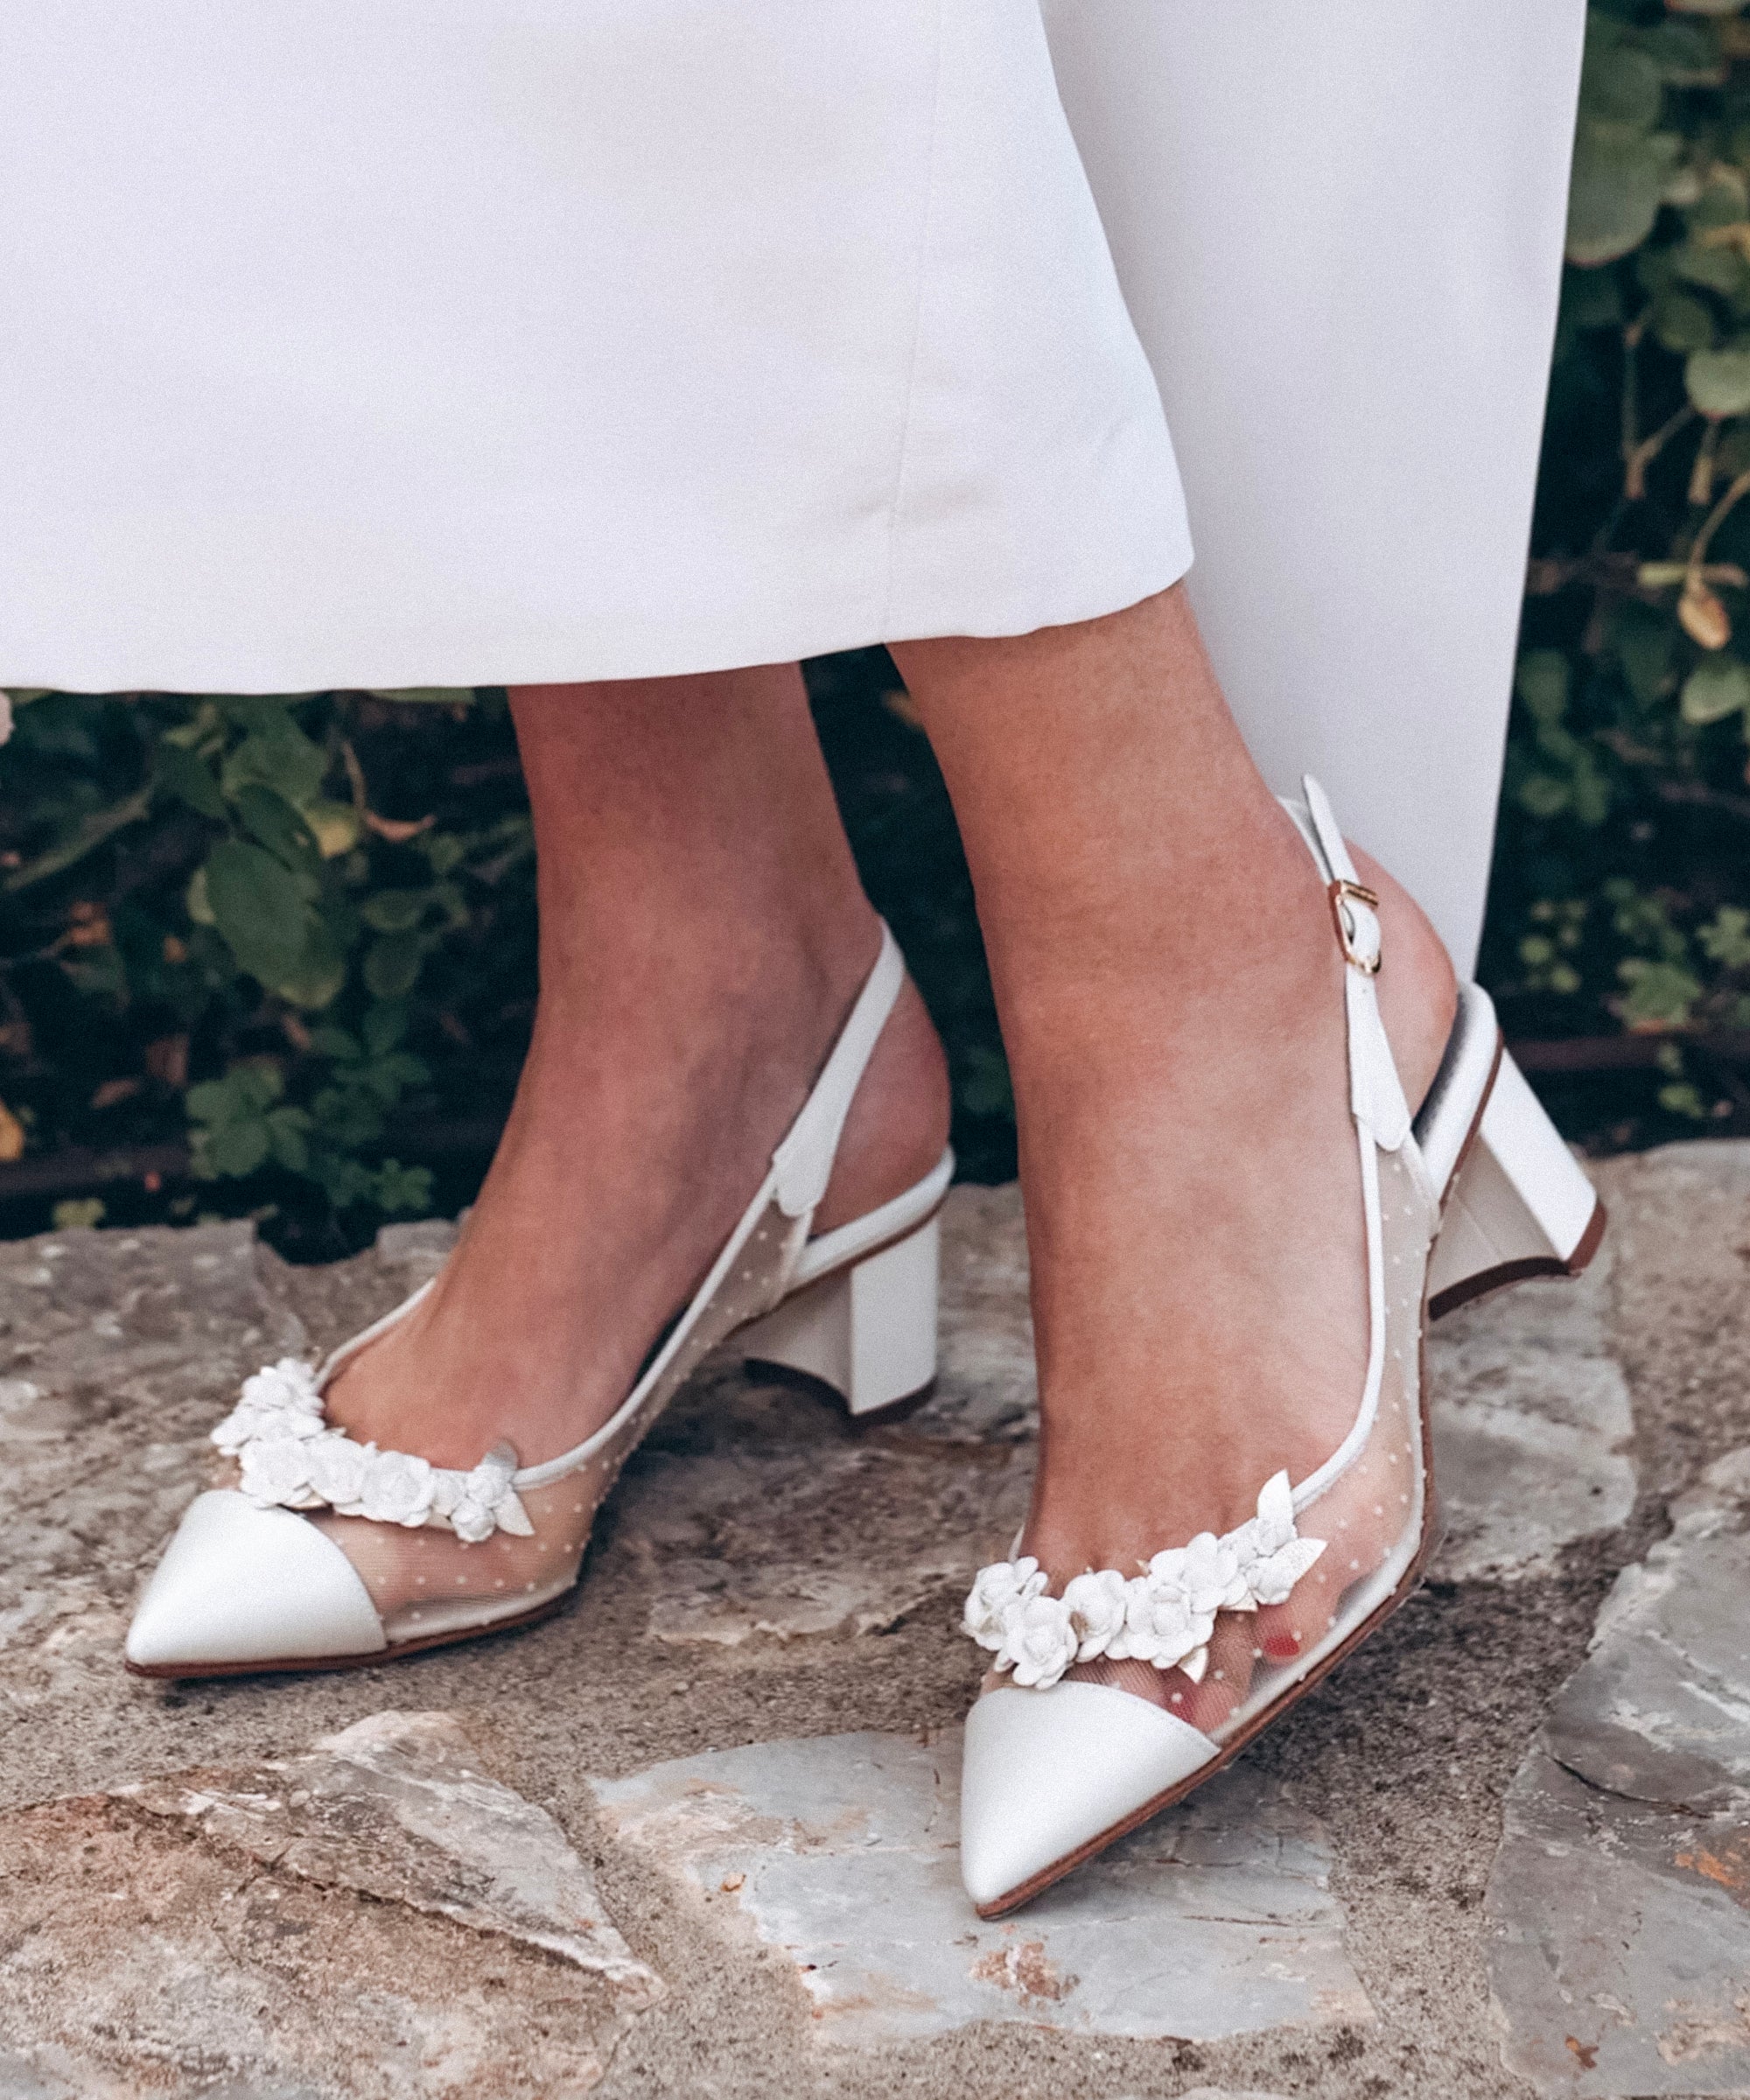 13 best wedding guest shoes that you'll feel comfortable in